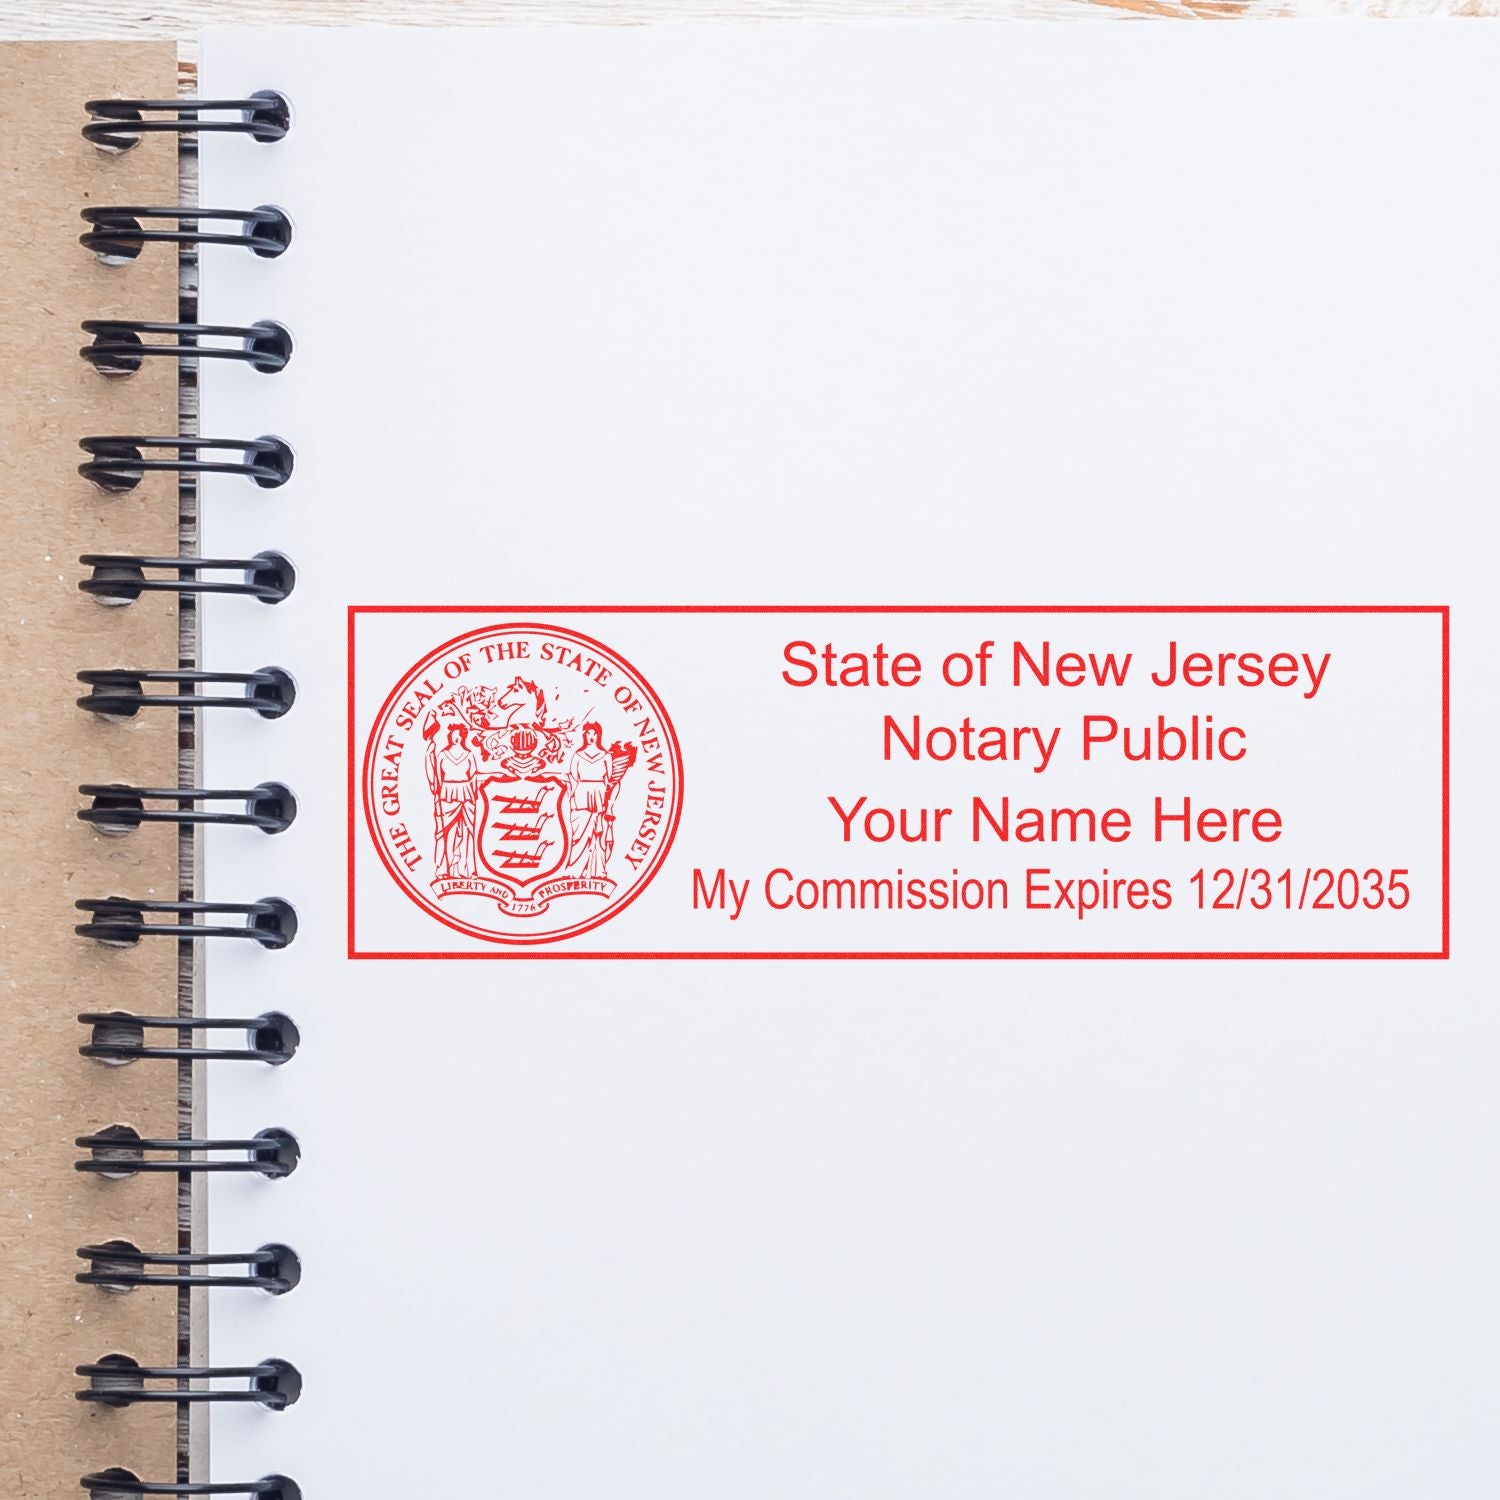 Another Example of a stamped impression of the Super Slim New Jersey Notary Public Stamp on a piece of office paper.